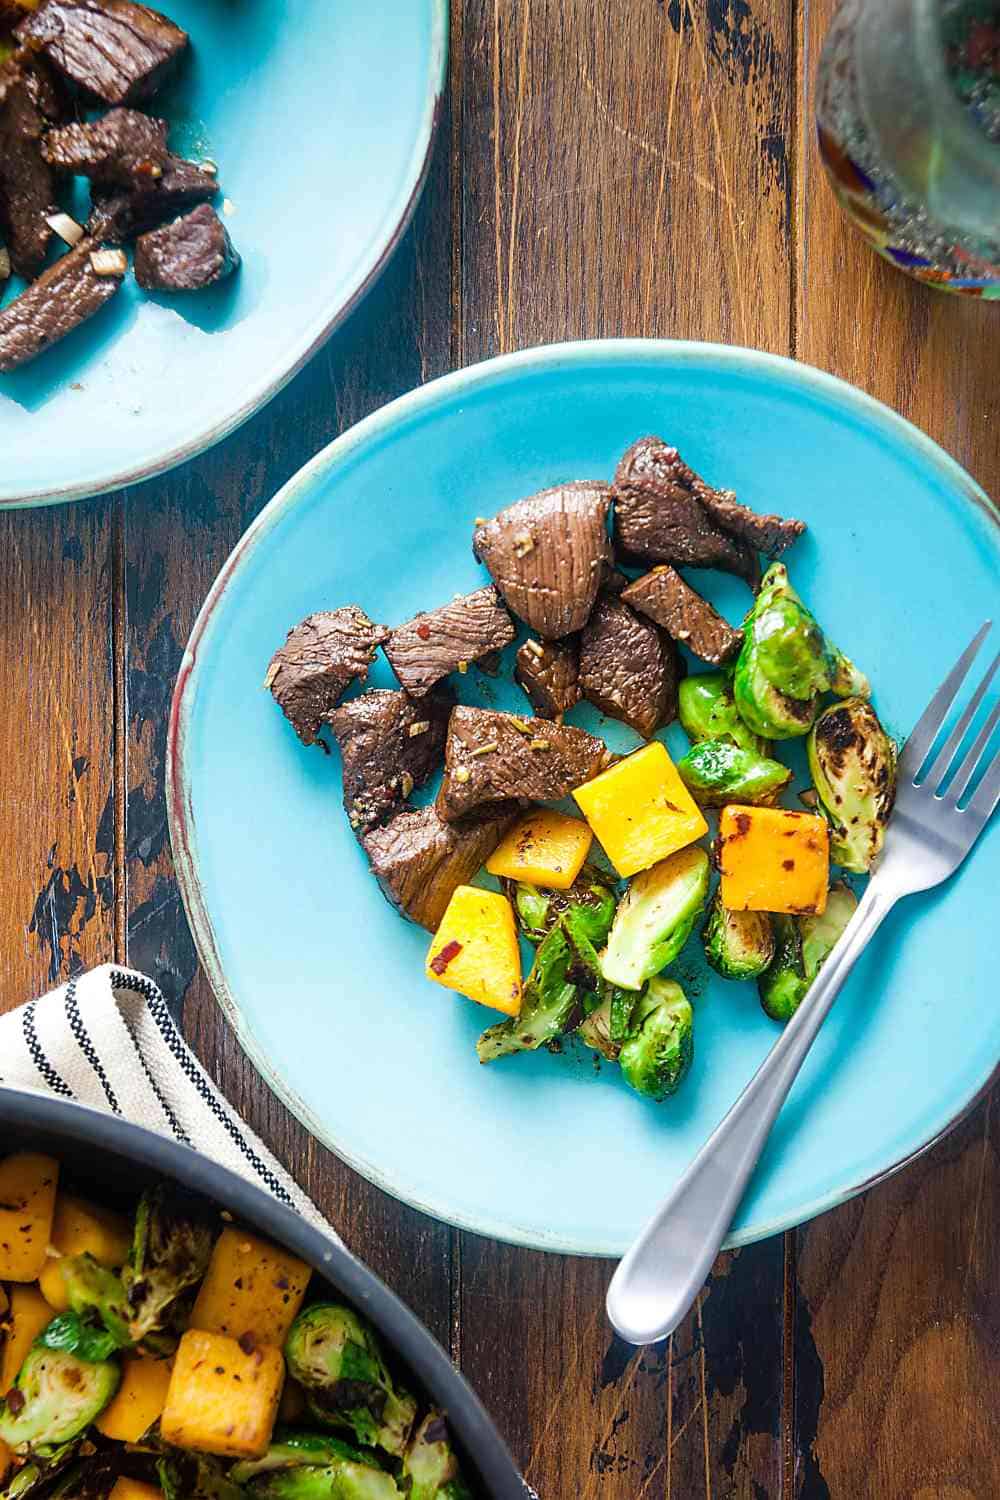 rosemary-balsamic marinaded steak tips with butternut squash and Brussles sprouts on a plate